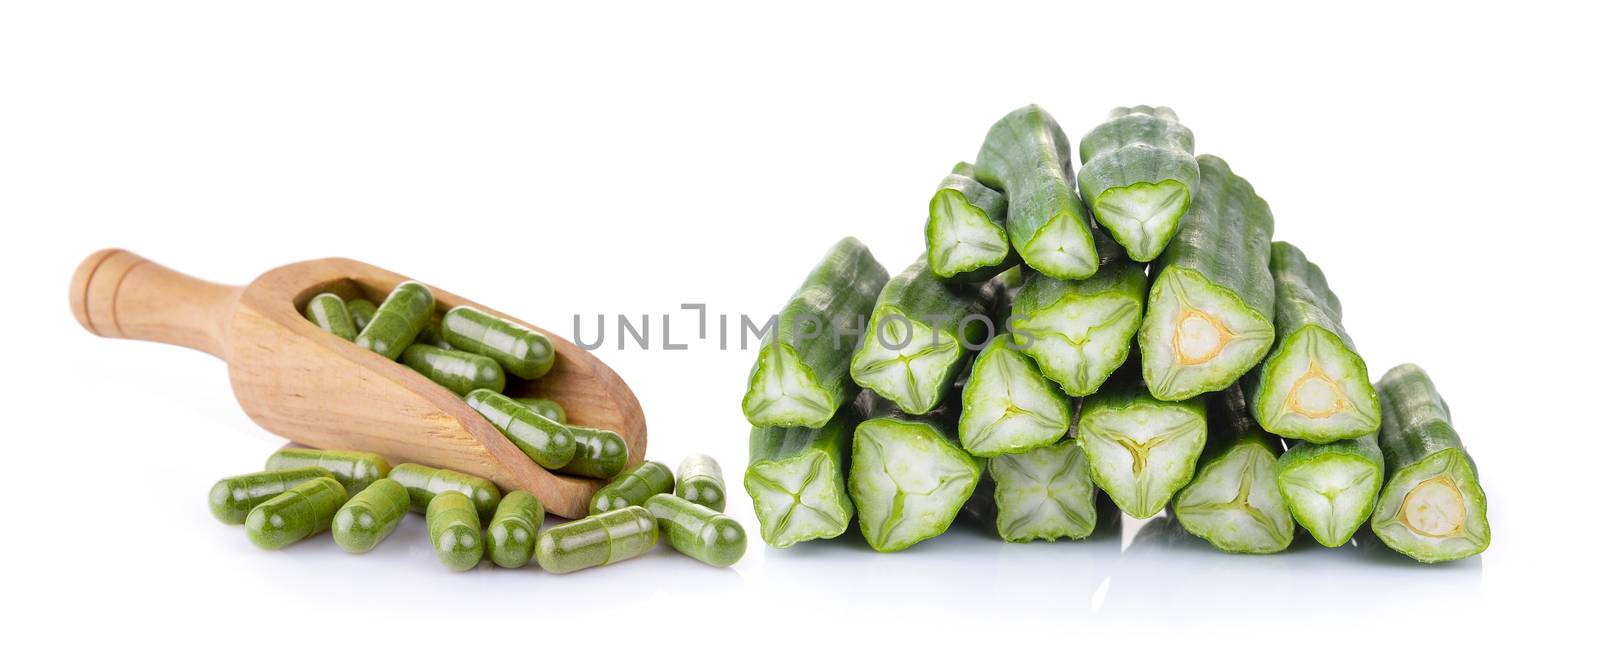 Moringa capsules and moringa in the scoop on white background